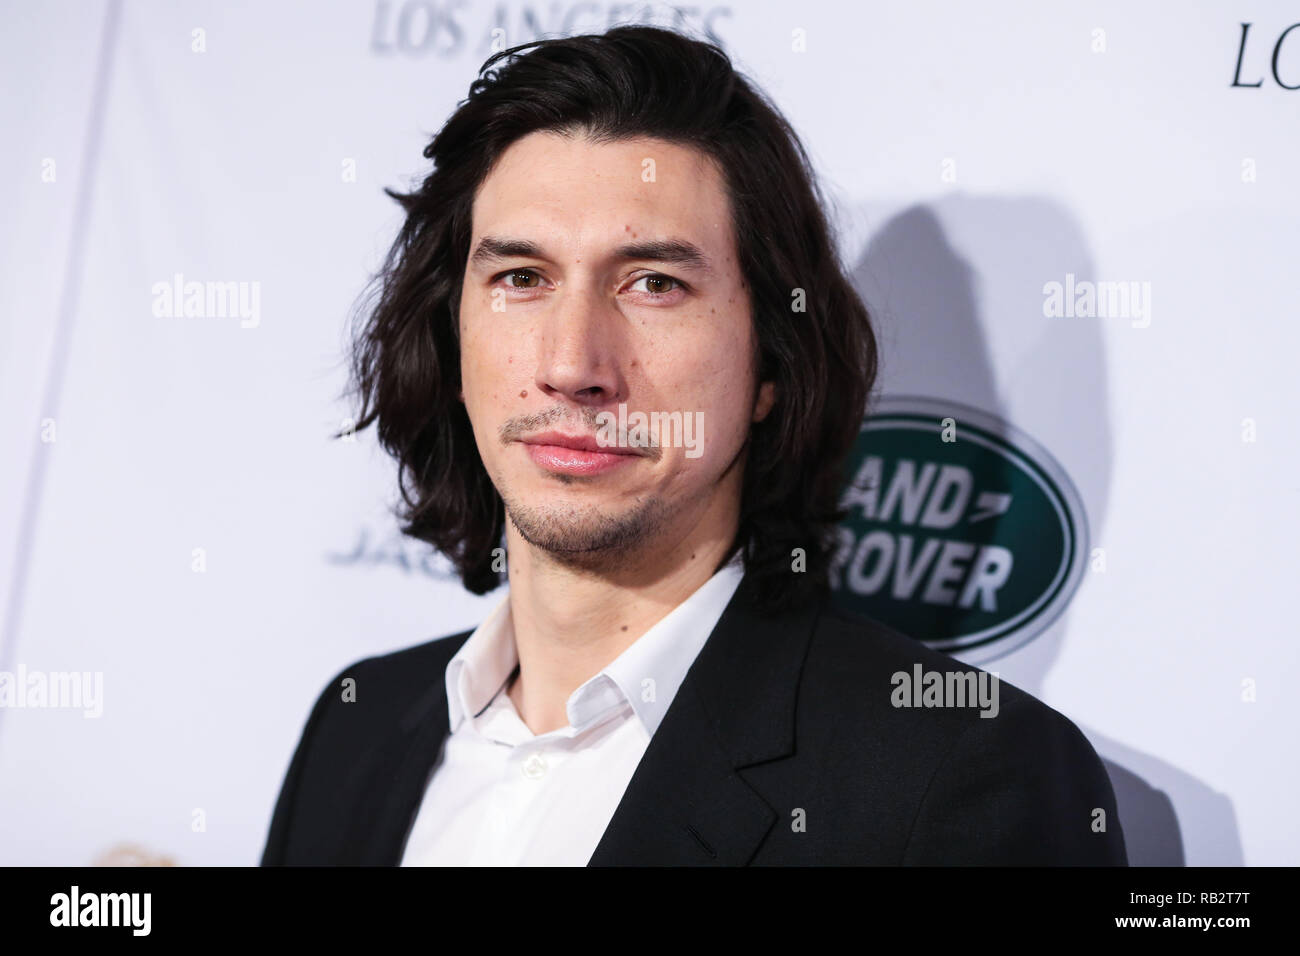 California, USA. 5th Jan 2019. Actor Adam Driver arrives at the BAFTA (British Academy of Film and Television Arts) Los Angeles Tea Party 2019 held at the Four Seasons Hotel Los Angeles at Beverly Hills on January 5, 2019 in Beverly Hills, Los Angeles, California, United States. (Photo by Xavier Collin/Image Press Agency) Credit: Image Press Agency/Alamy Live News Stock Photo